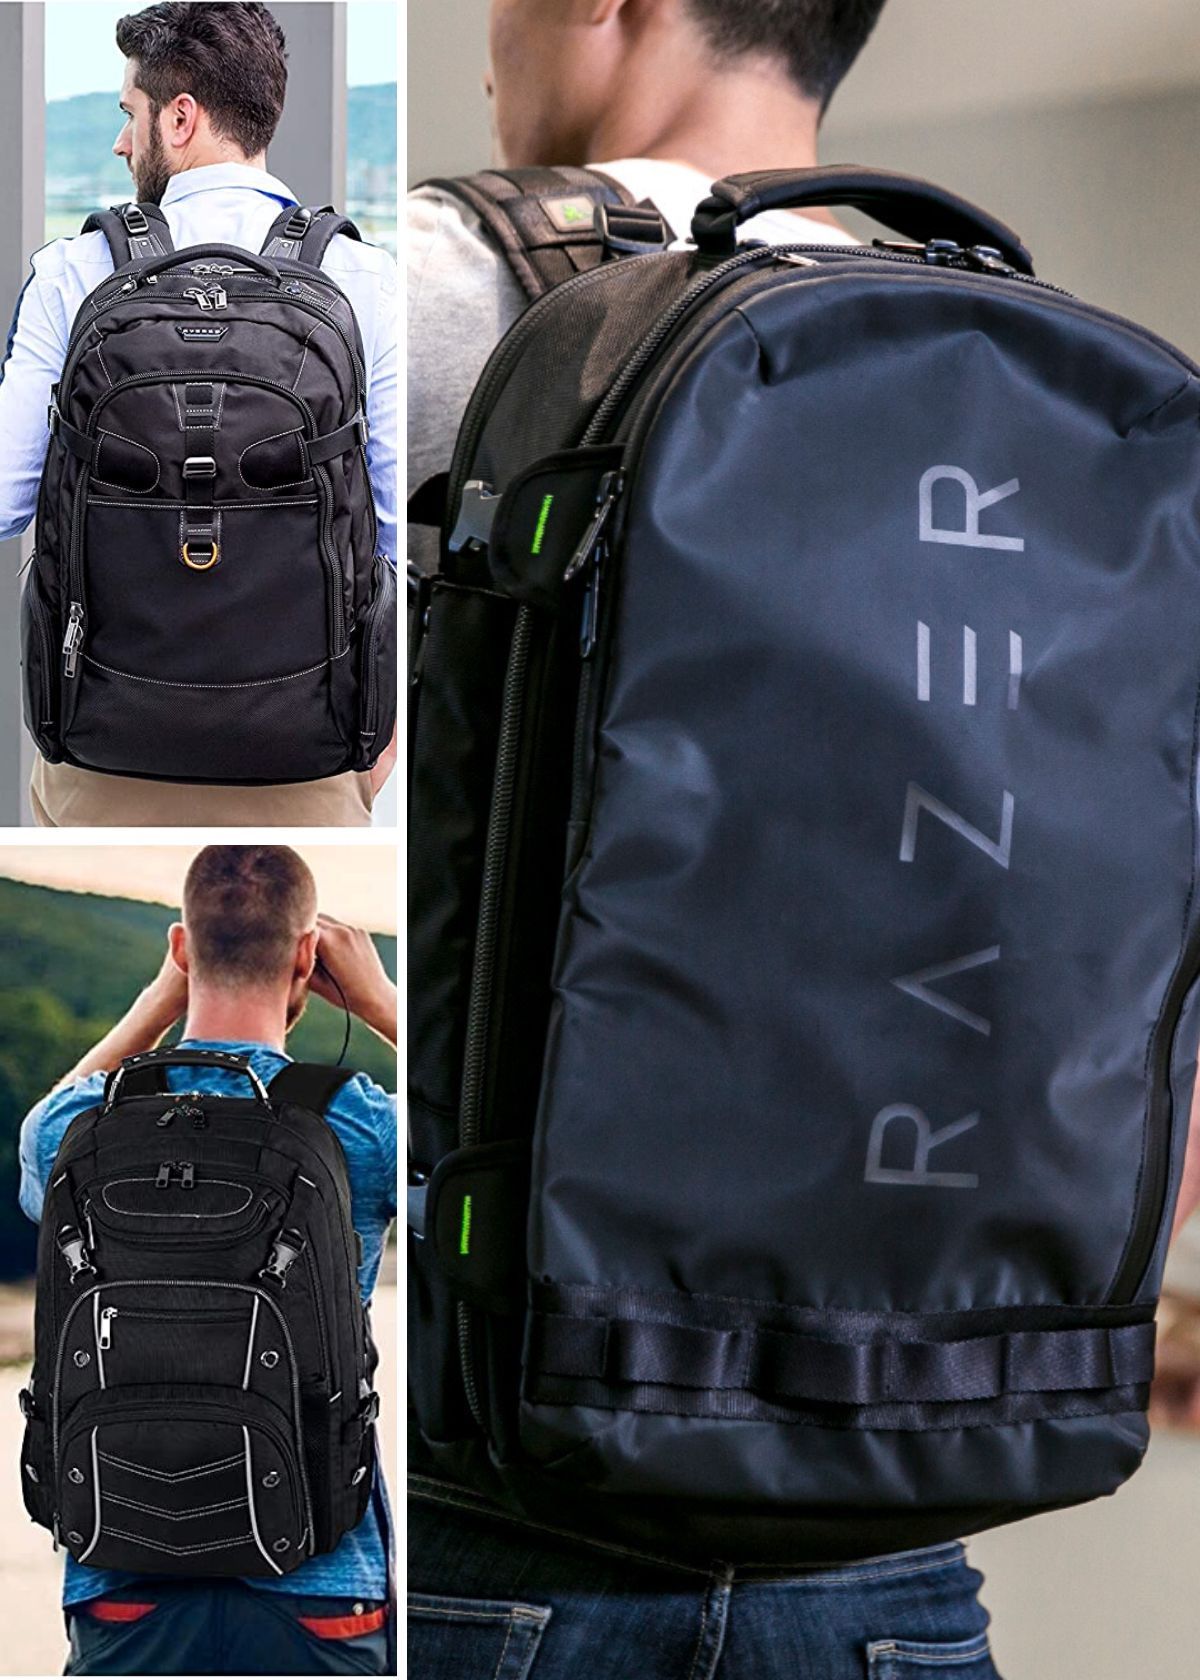 13 Of The Best Gaming Backpacks For Serious Gamers: 2023